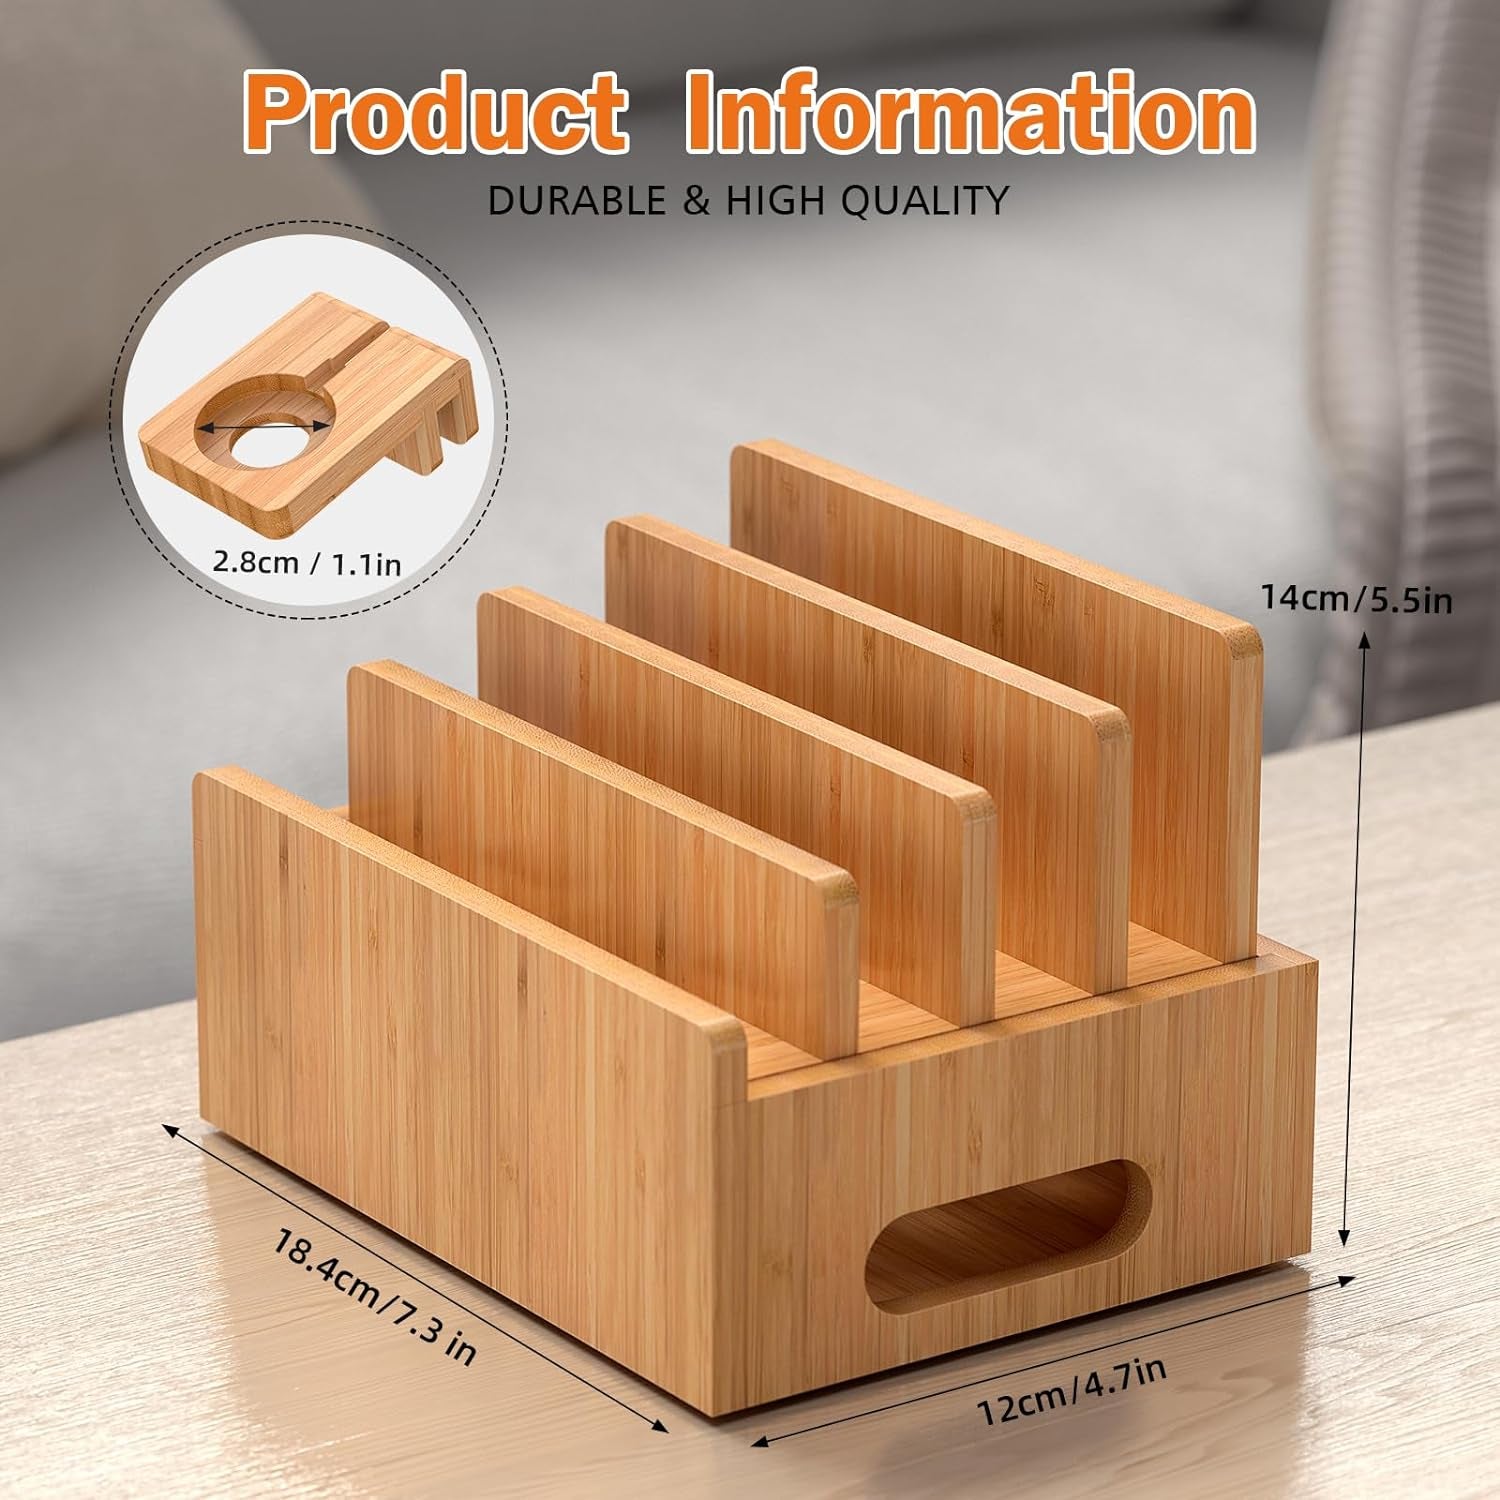 Bamboo Charging Station for Multi-Device with 4 Slots, Charging Dock Stand Compatible with Cellphone, Tablet, Watch (Include 6 Charger Cables, Watch Stand, NO USB Charger)